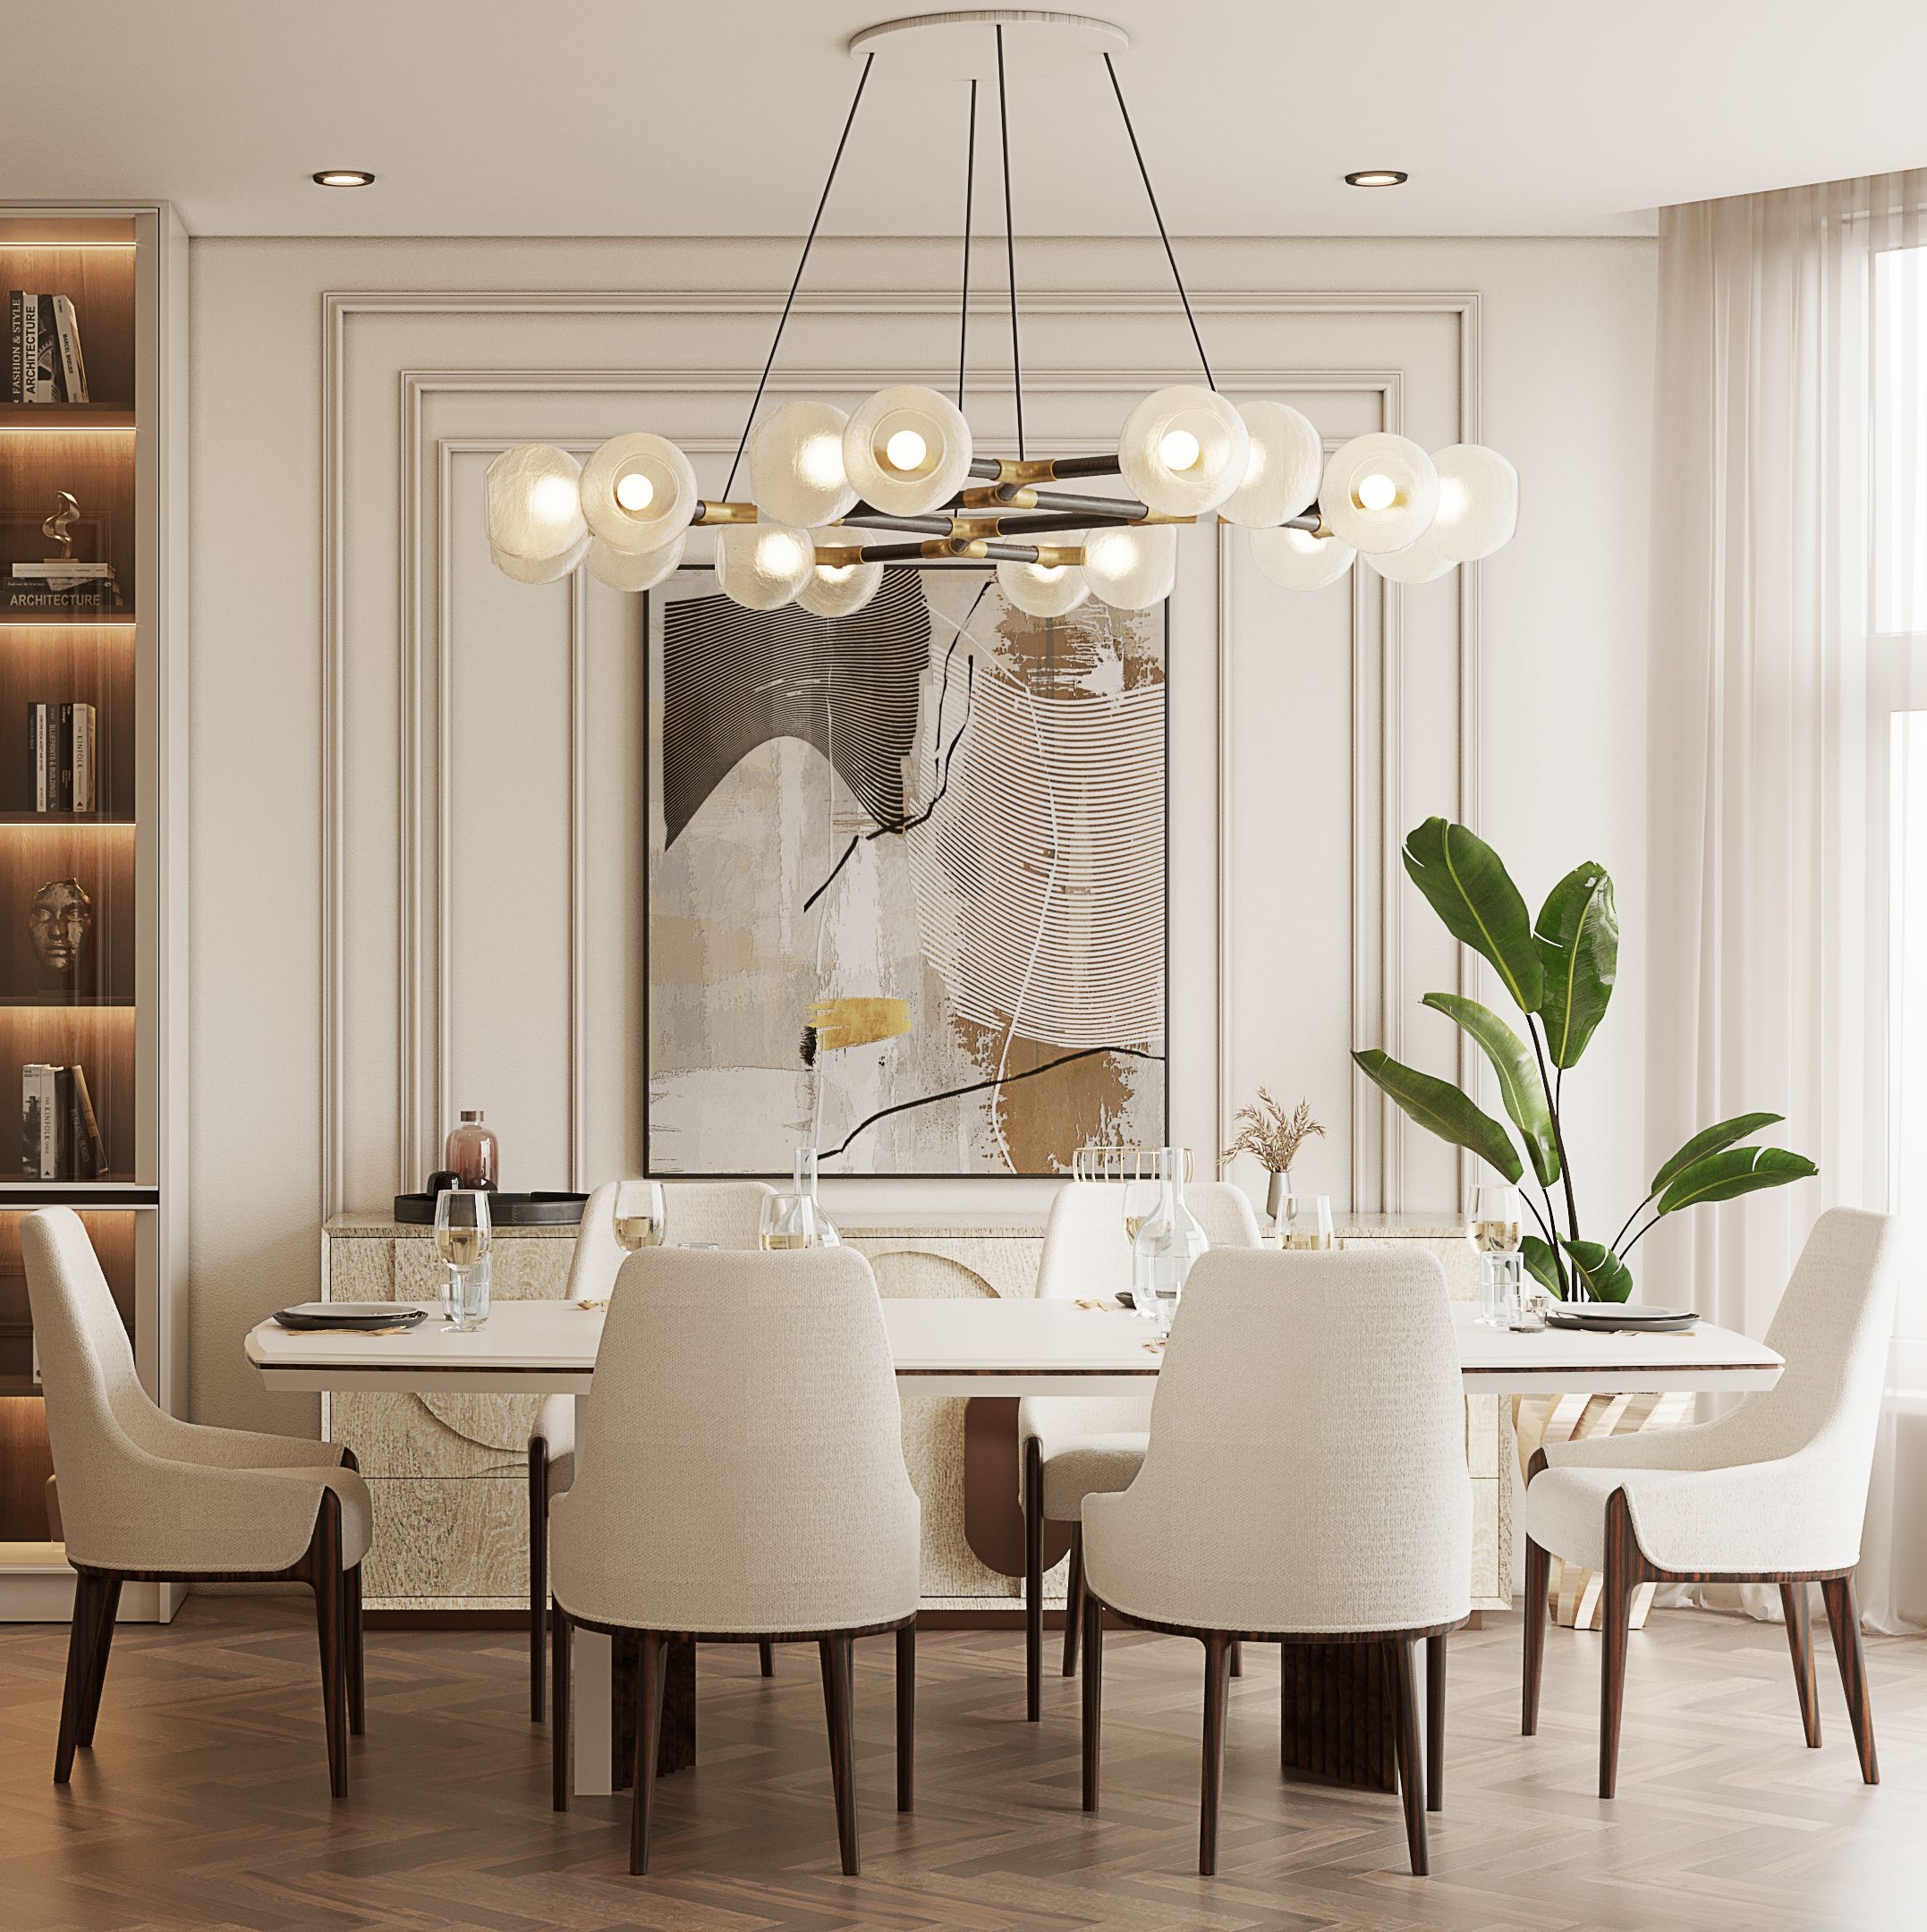 Dining Room Project How to blend elegance and simplicity in your home